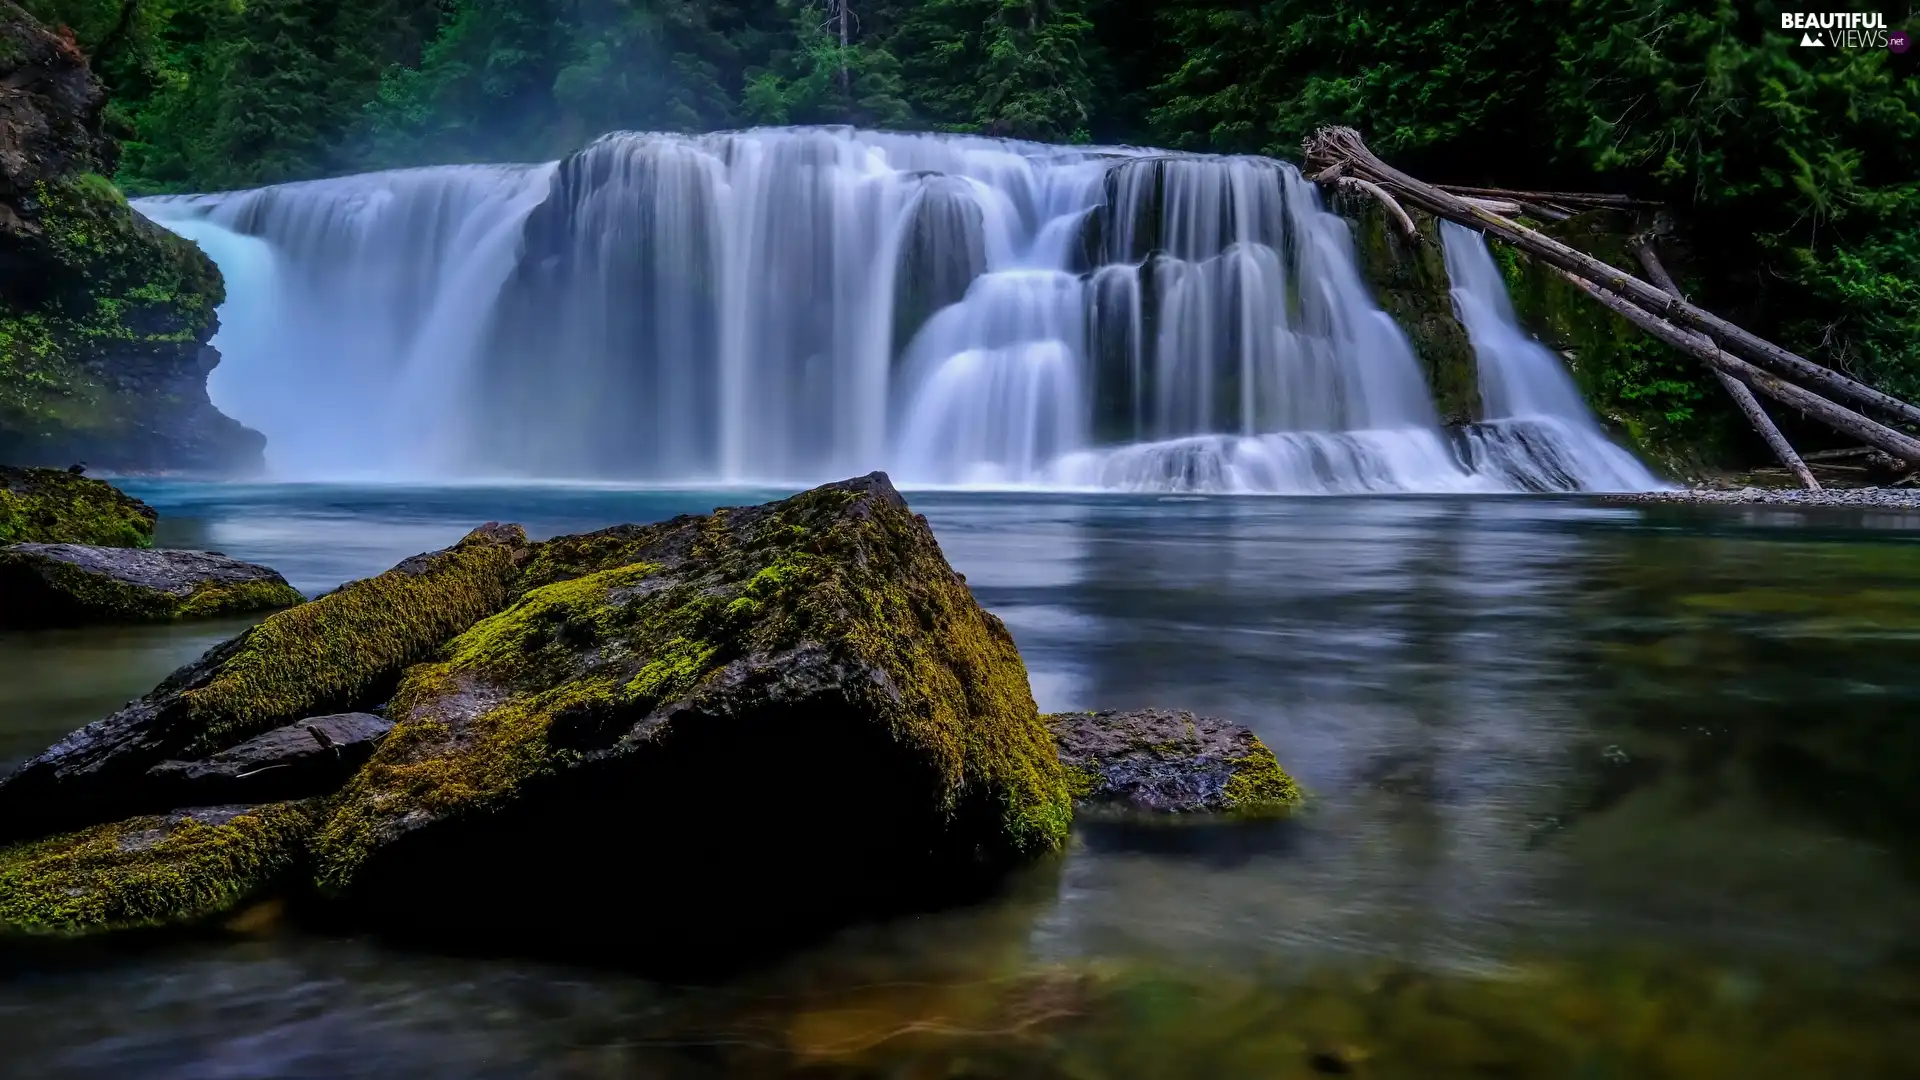 The United States, Cougar Settlement, Stones, Washington State, Lower Lewis River Falls, mossy, forest